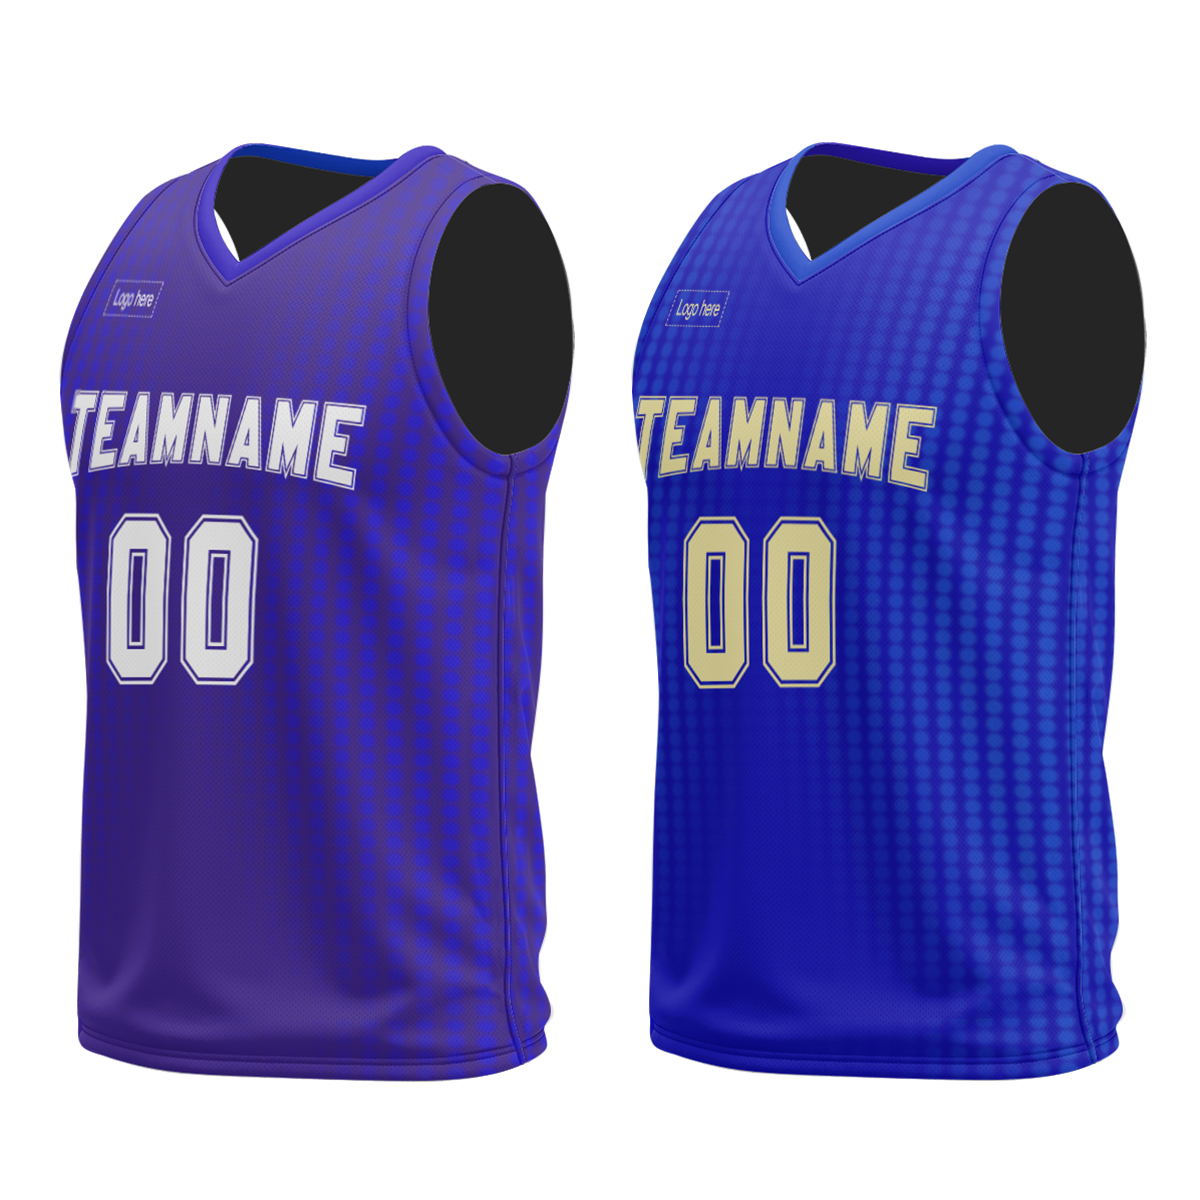 newest-customize-printed-basketball-jersey-design-color-sublimated-basketball-uniforms-set-at-cj-pod-5